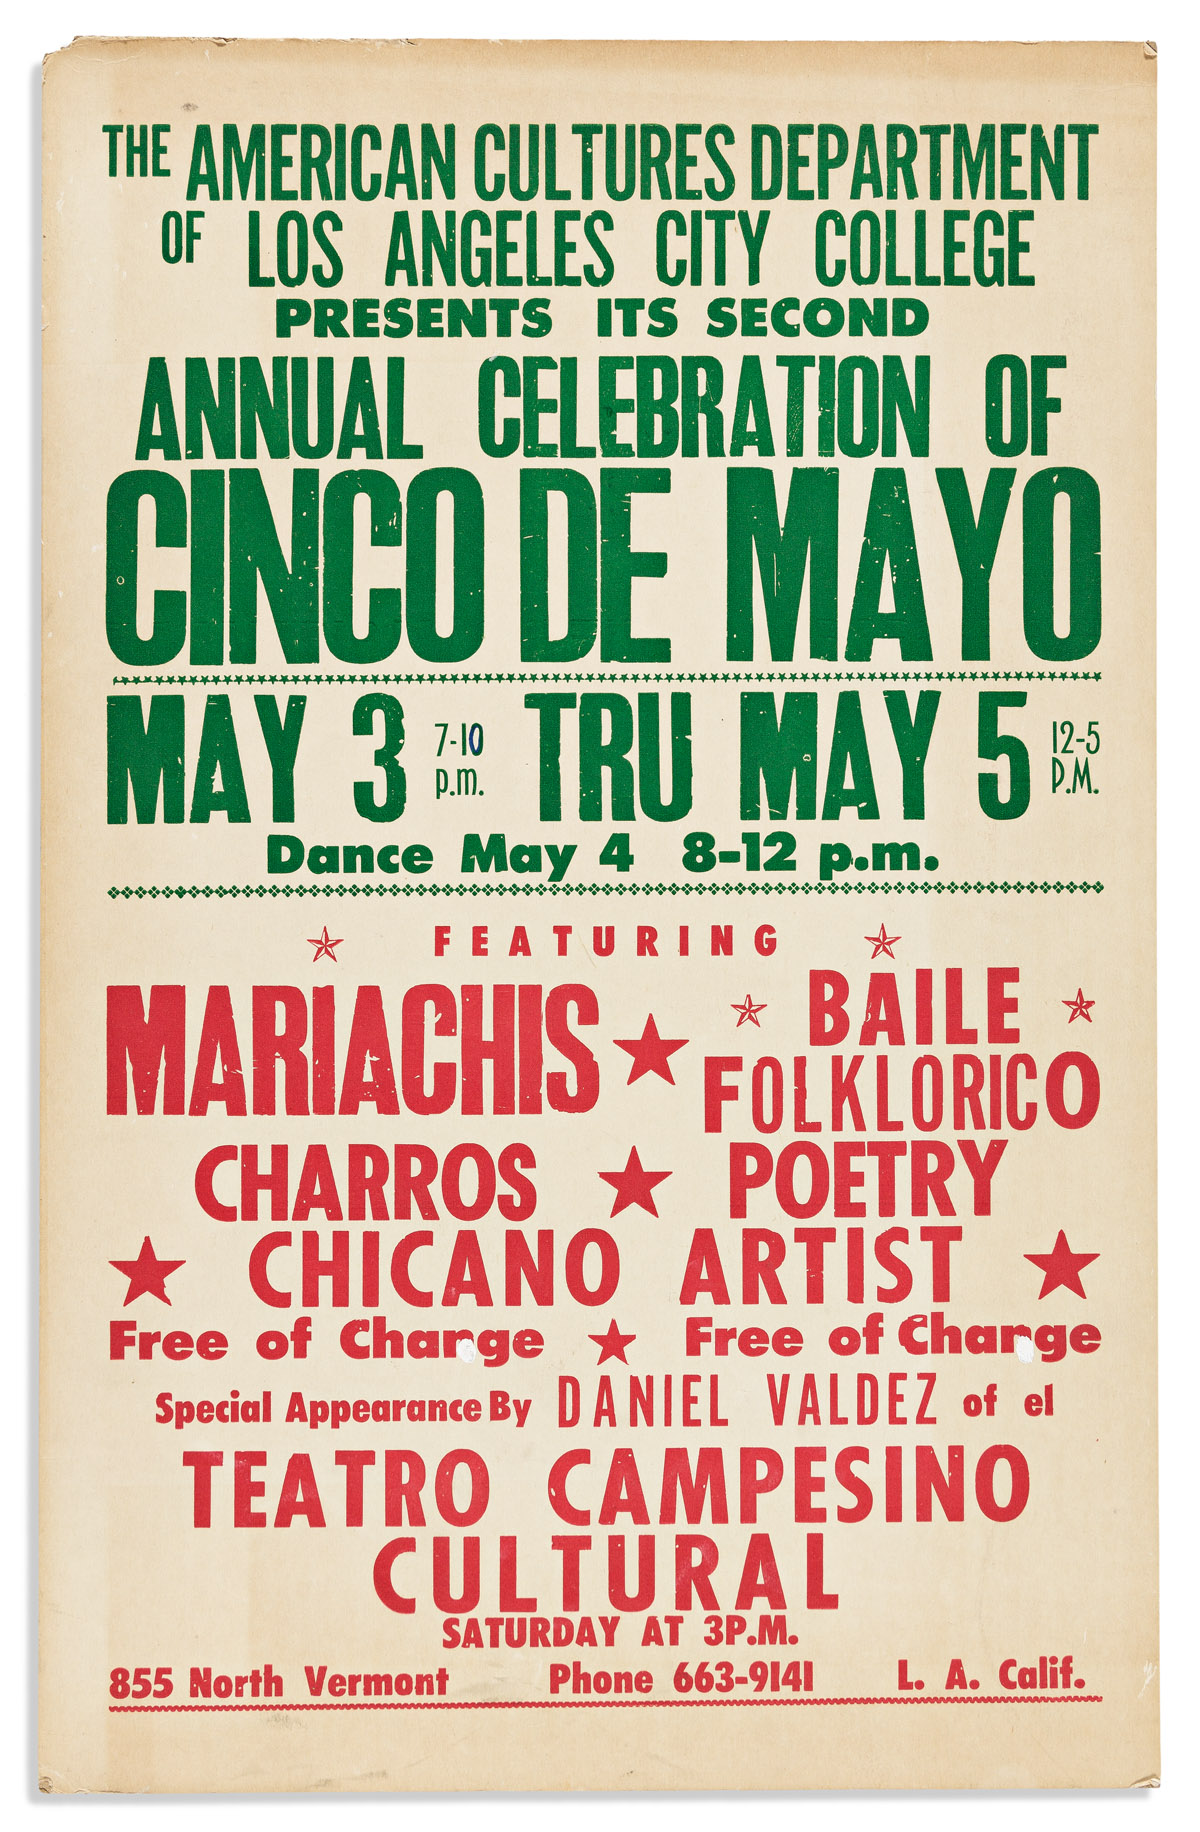 (CALIFORNIA.) Poster for Cinco de Mayo celebration at Los Angeles City College featuring Teatro Campesino.